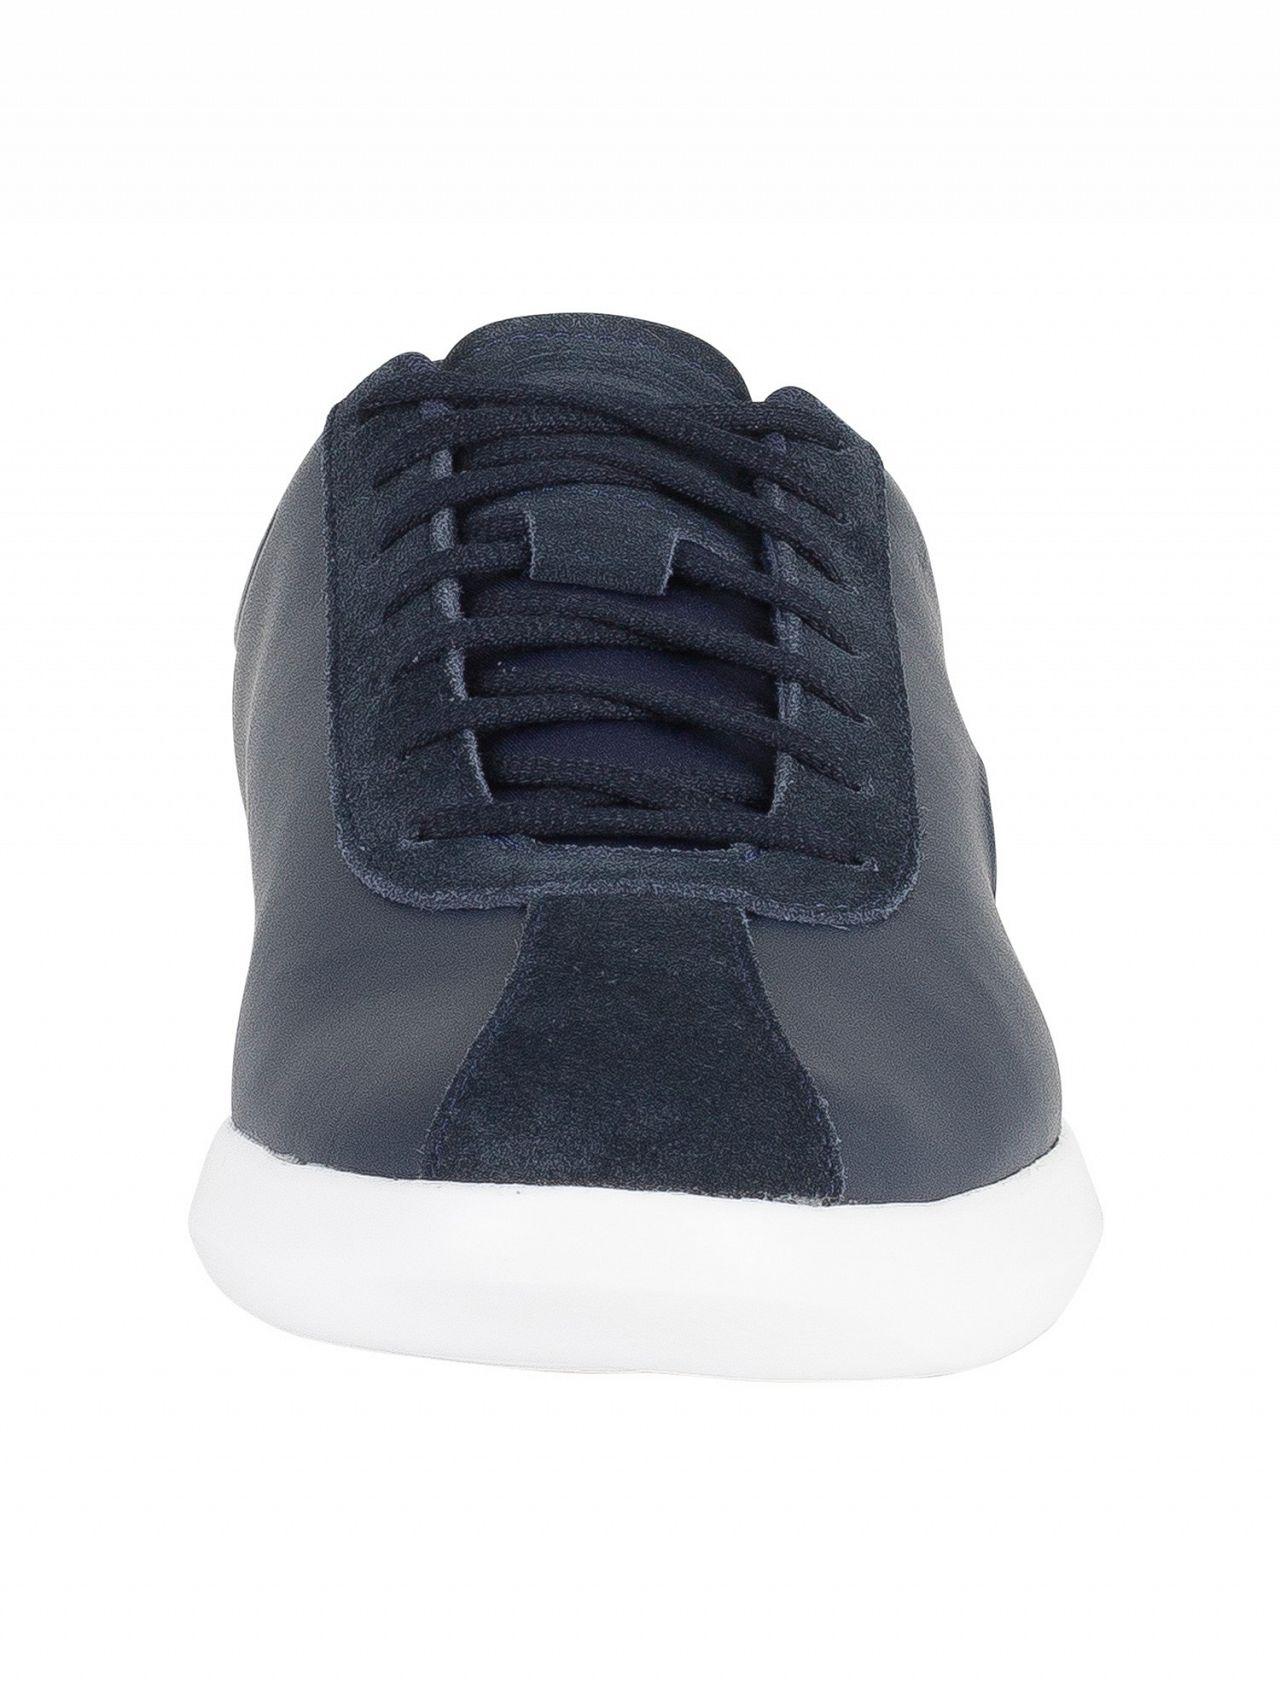 Lacoste Suede Navy/white Avance 318 2 Spm Trainers in Blue for Men - Lyst